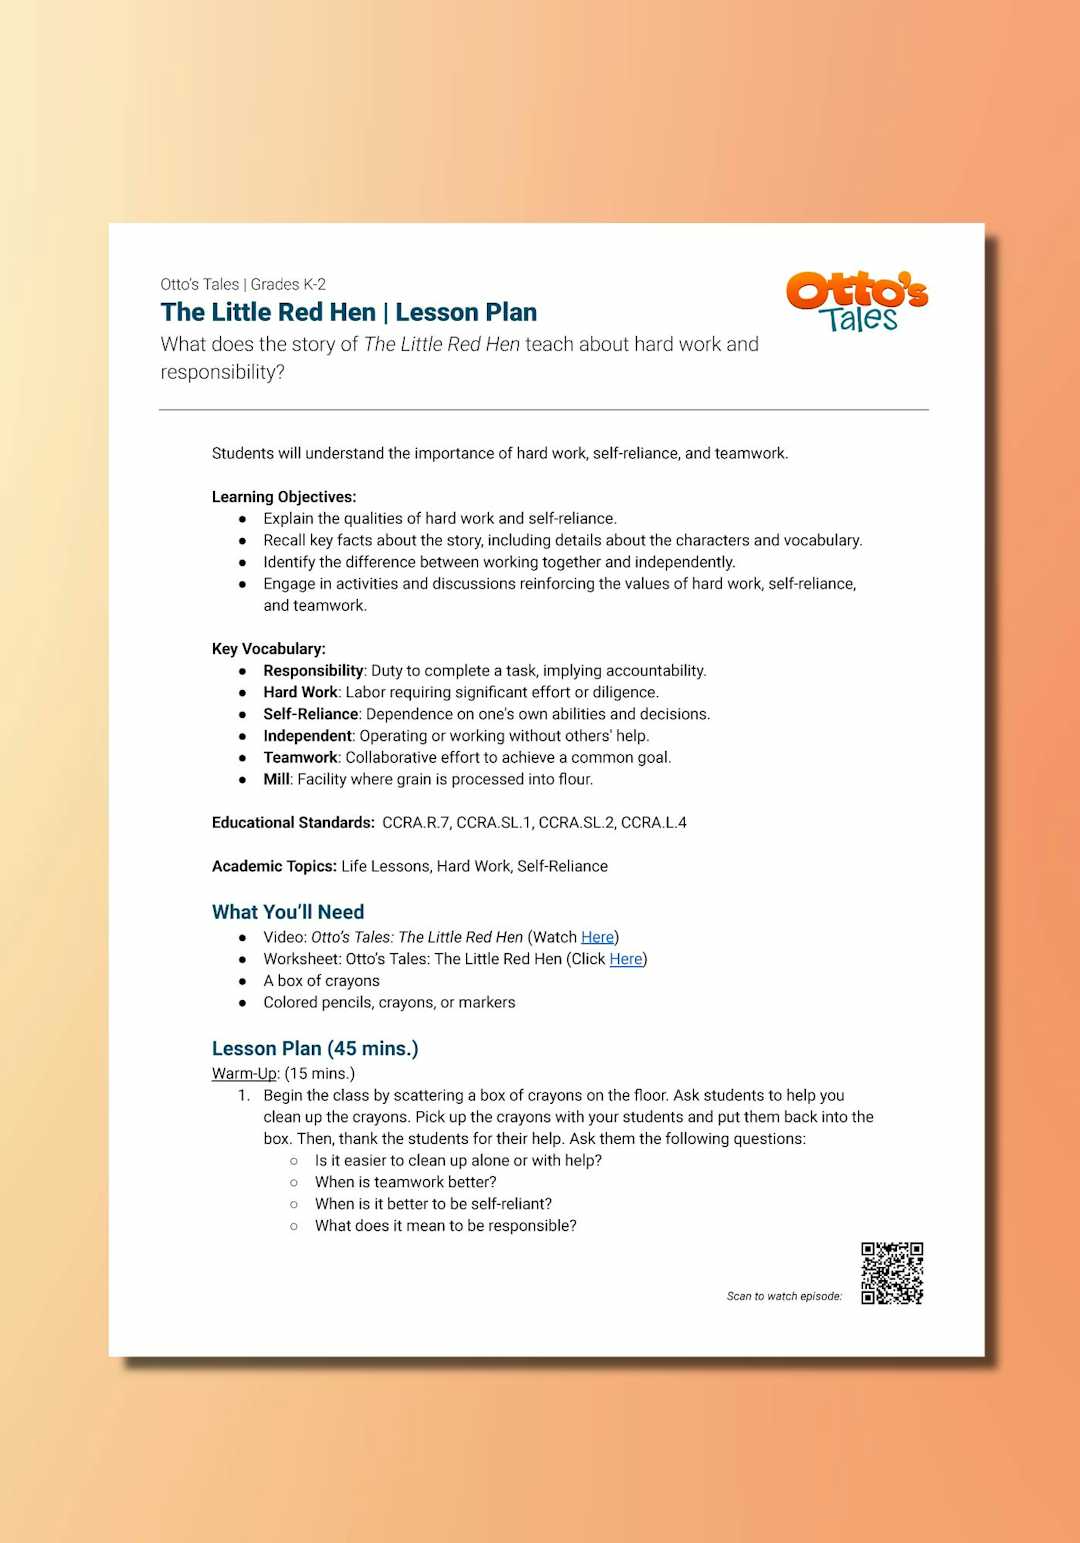 "Otto's Tales: The Little Red Hen" Lesson Plan